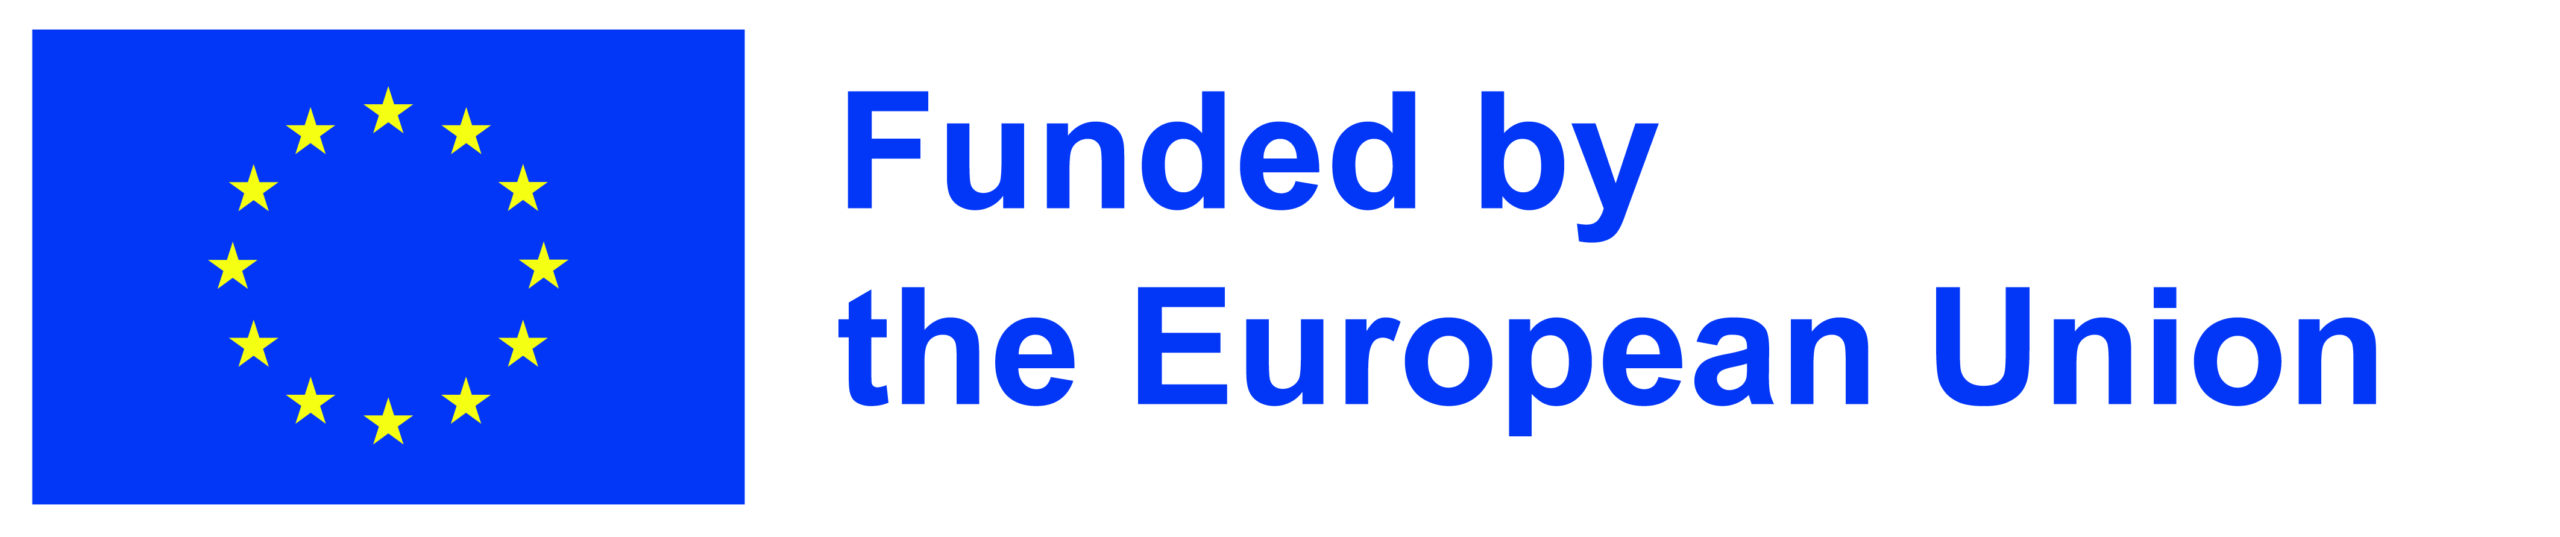 This project has received funding from the European Union’s Horizon Europe research and innovation funding programme under Grant Agreement 101135144. Subvención total: 1.509.809,06 euros. Subvención para ITENE: 182.843,43 euros.